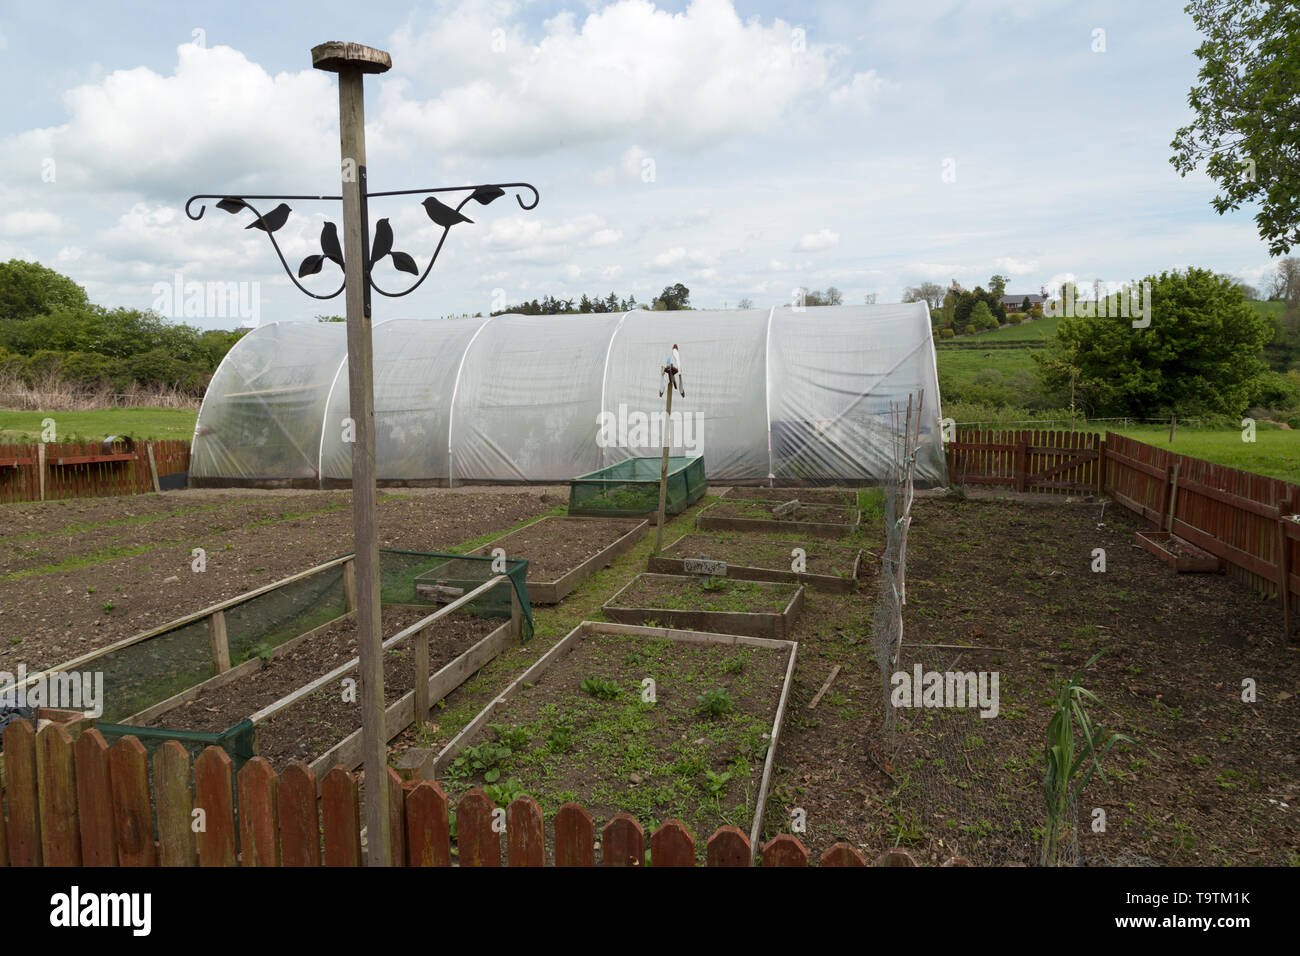 Grow your own: A poly tunnel and vegetable beds in a field Stock Photo